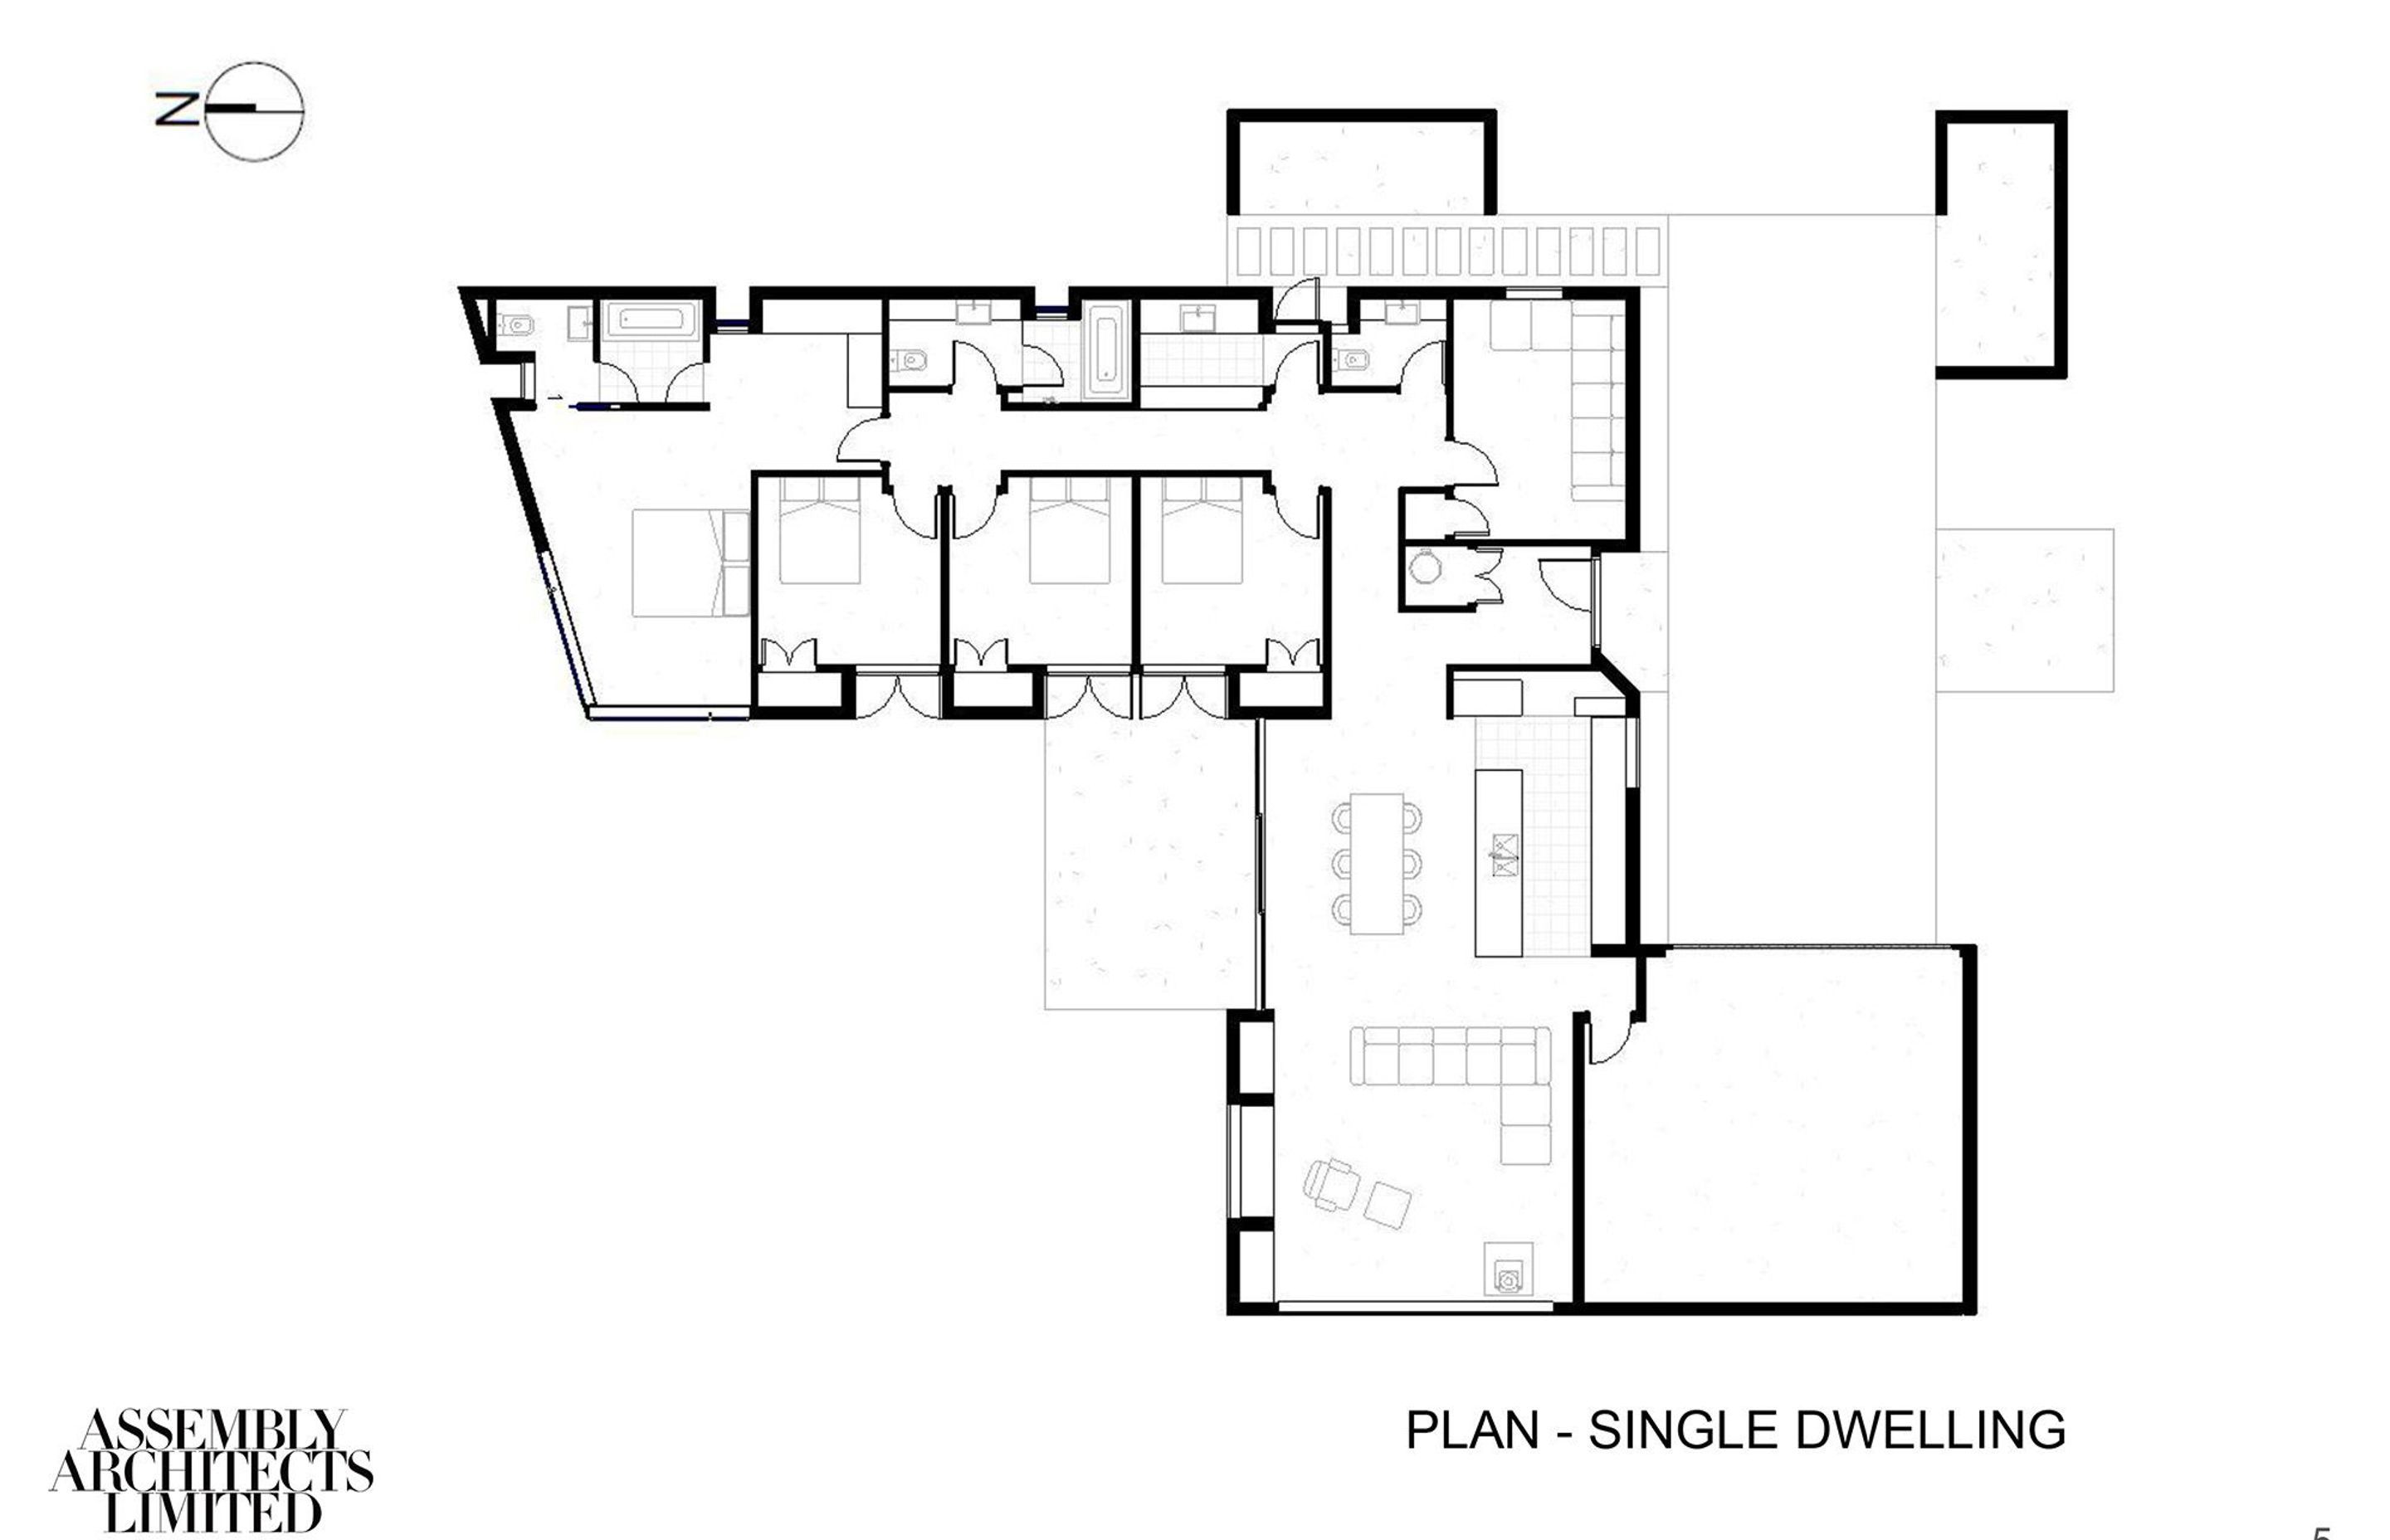 A plan of a typical single dwelling, by Assembly Architects.